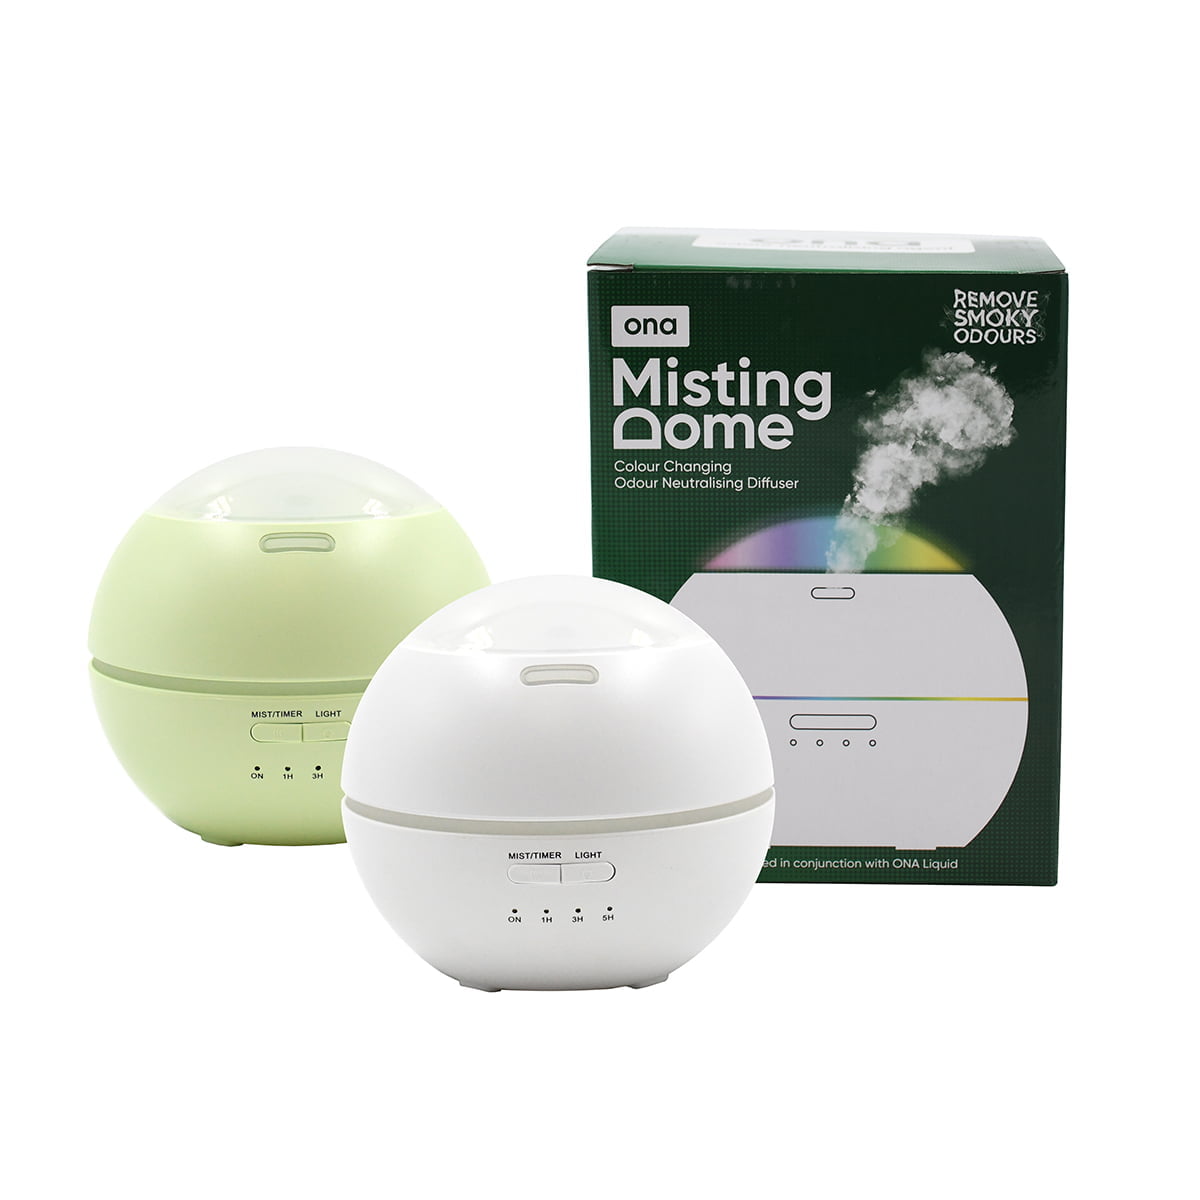 ONA misting dome is an electronic odour neutraliser that provides natural odour elimination so that you can remove foul smells with ease